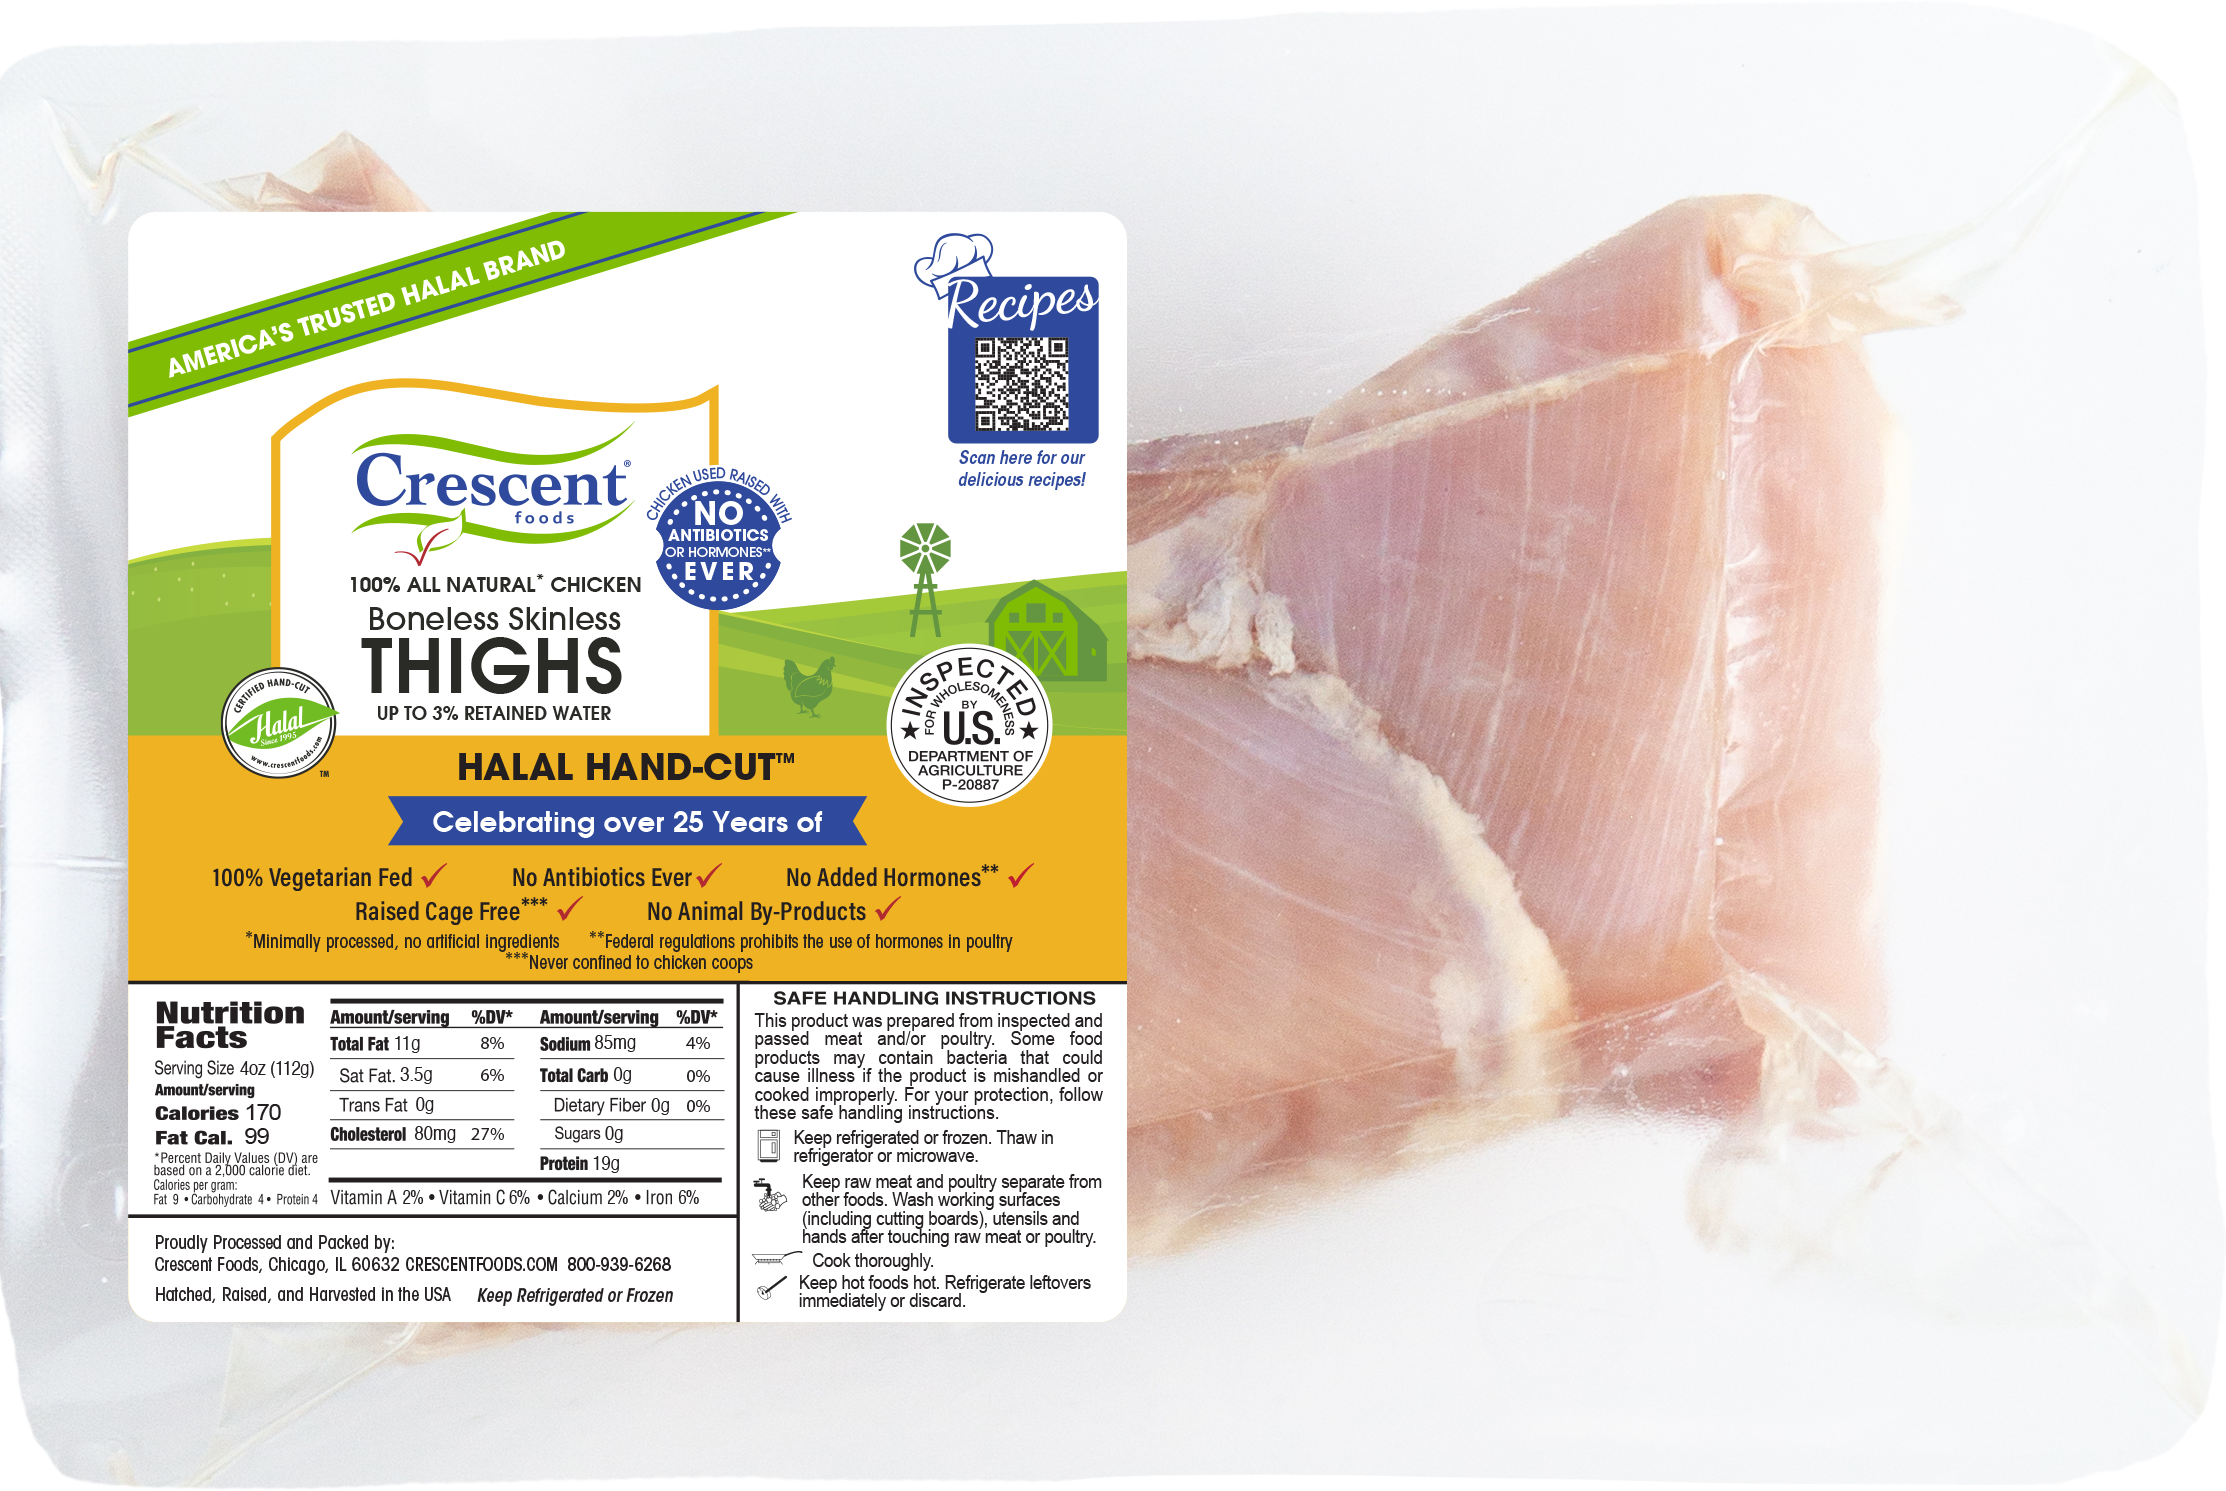 Crescent Foods Boneless Skinless Chicken Thighs in Packaging